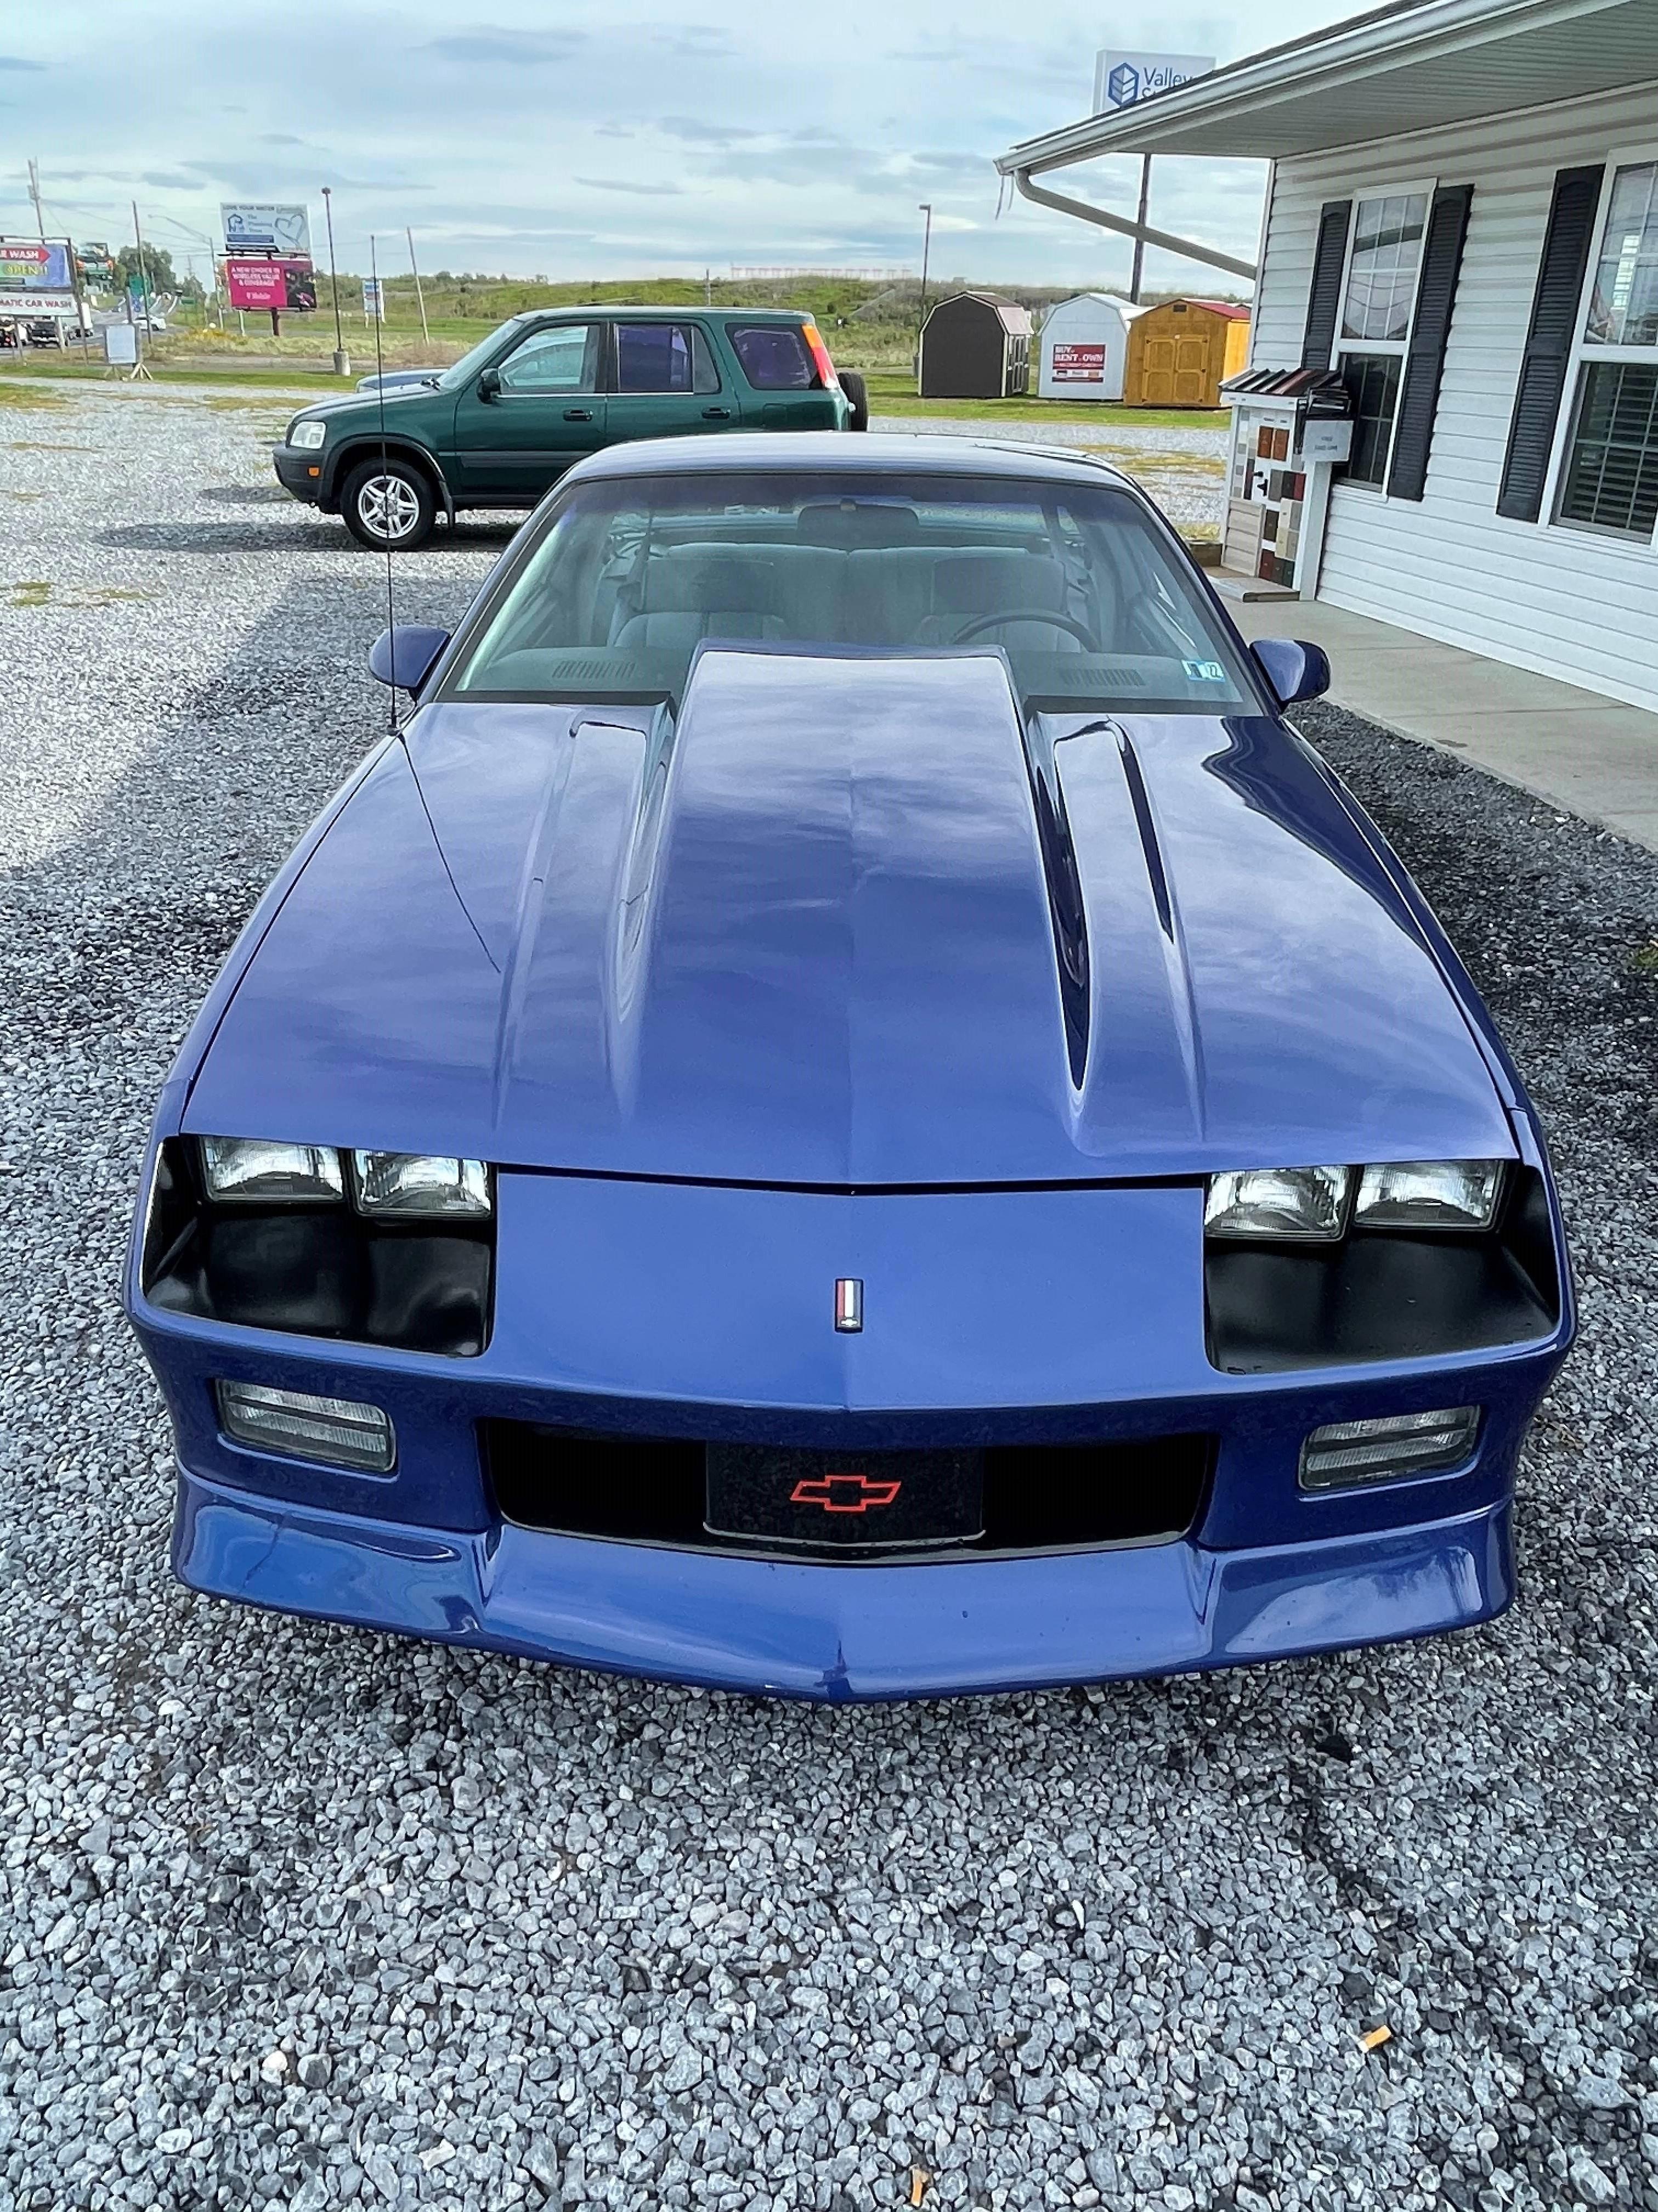 1992 Chevrolet Camaro Coupe. Has been modified. Super clean no rust. Low ac